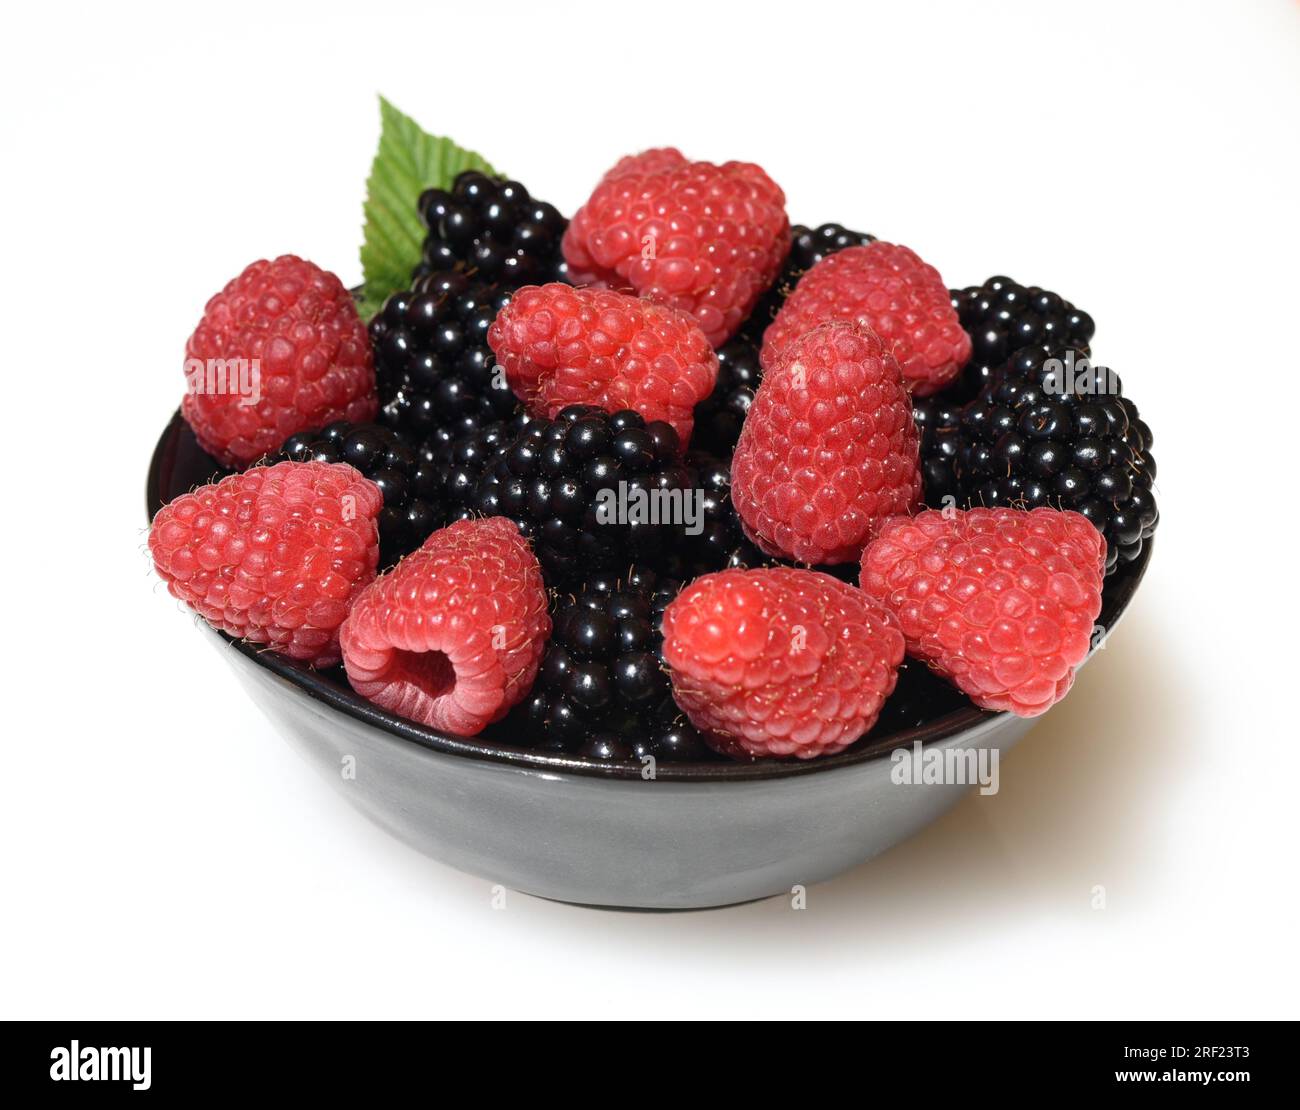 Raspberries, Rubus idaeus, is a tasty berry plant with red berries. Stock Photo